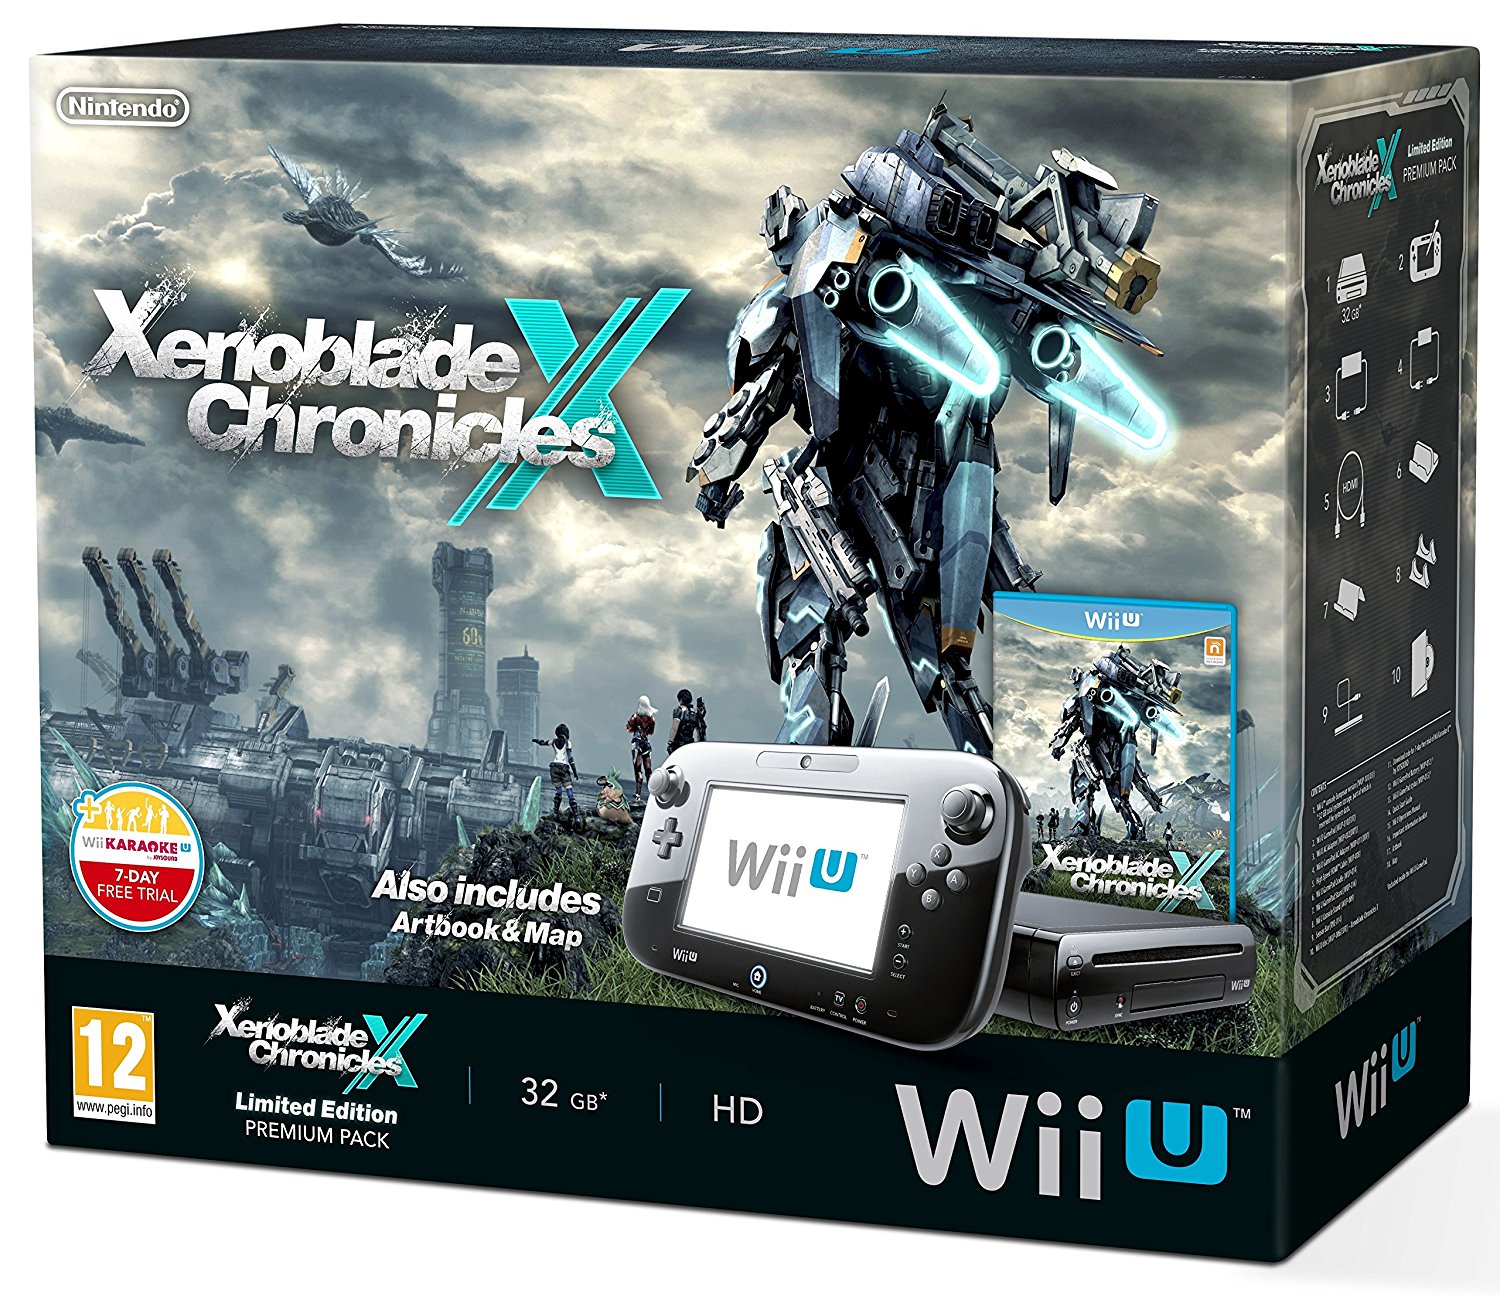 Wii U Premium Pack 32 GB - Black incl. Xenoblade Chronicles X Limited Edition